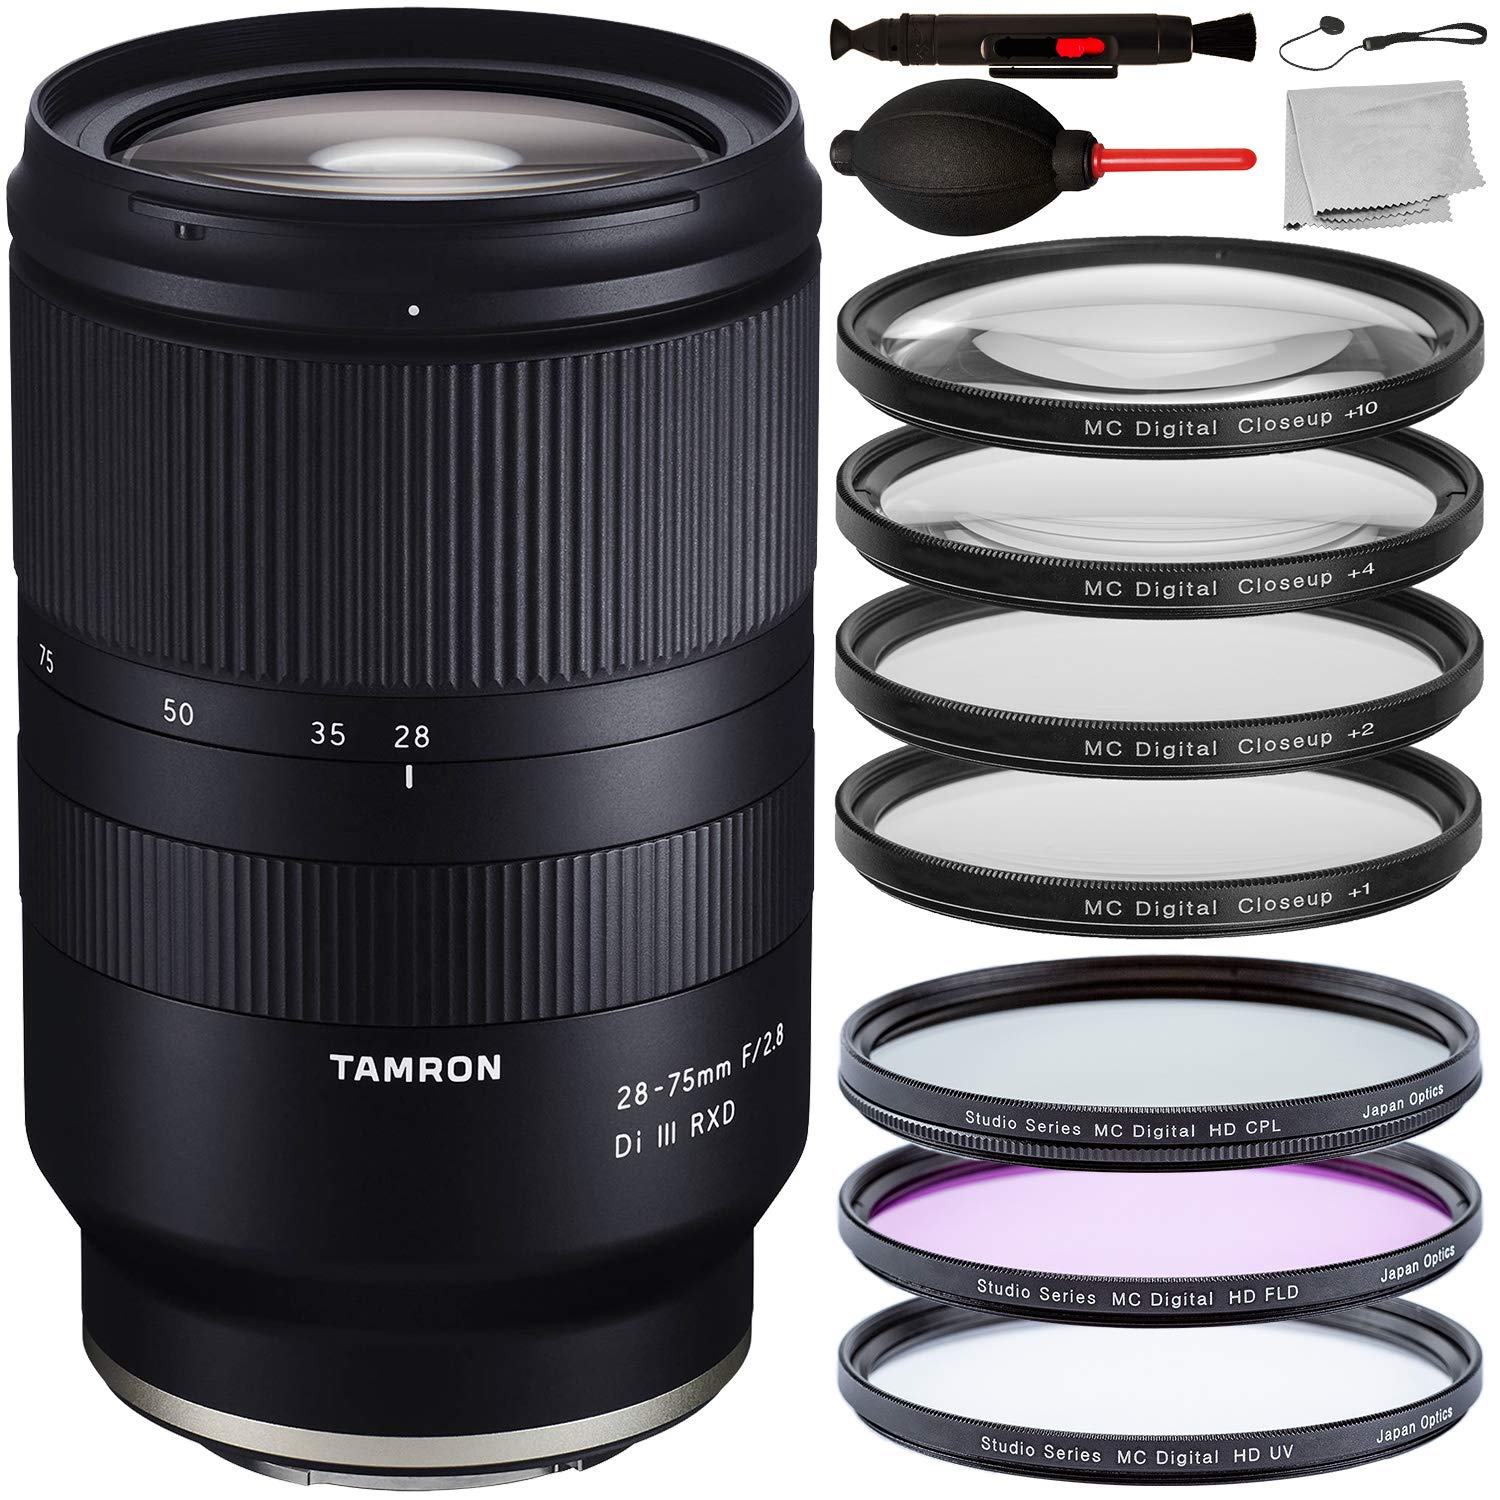 Tamron 28-75mm F/2.8 Di III RXD Lens For Sony E -A036 With